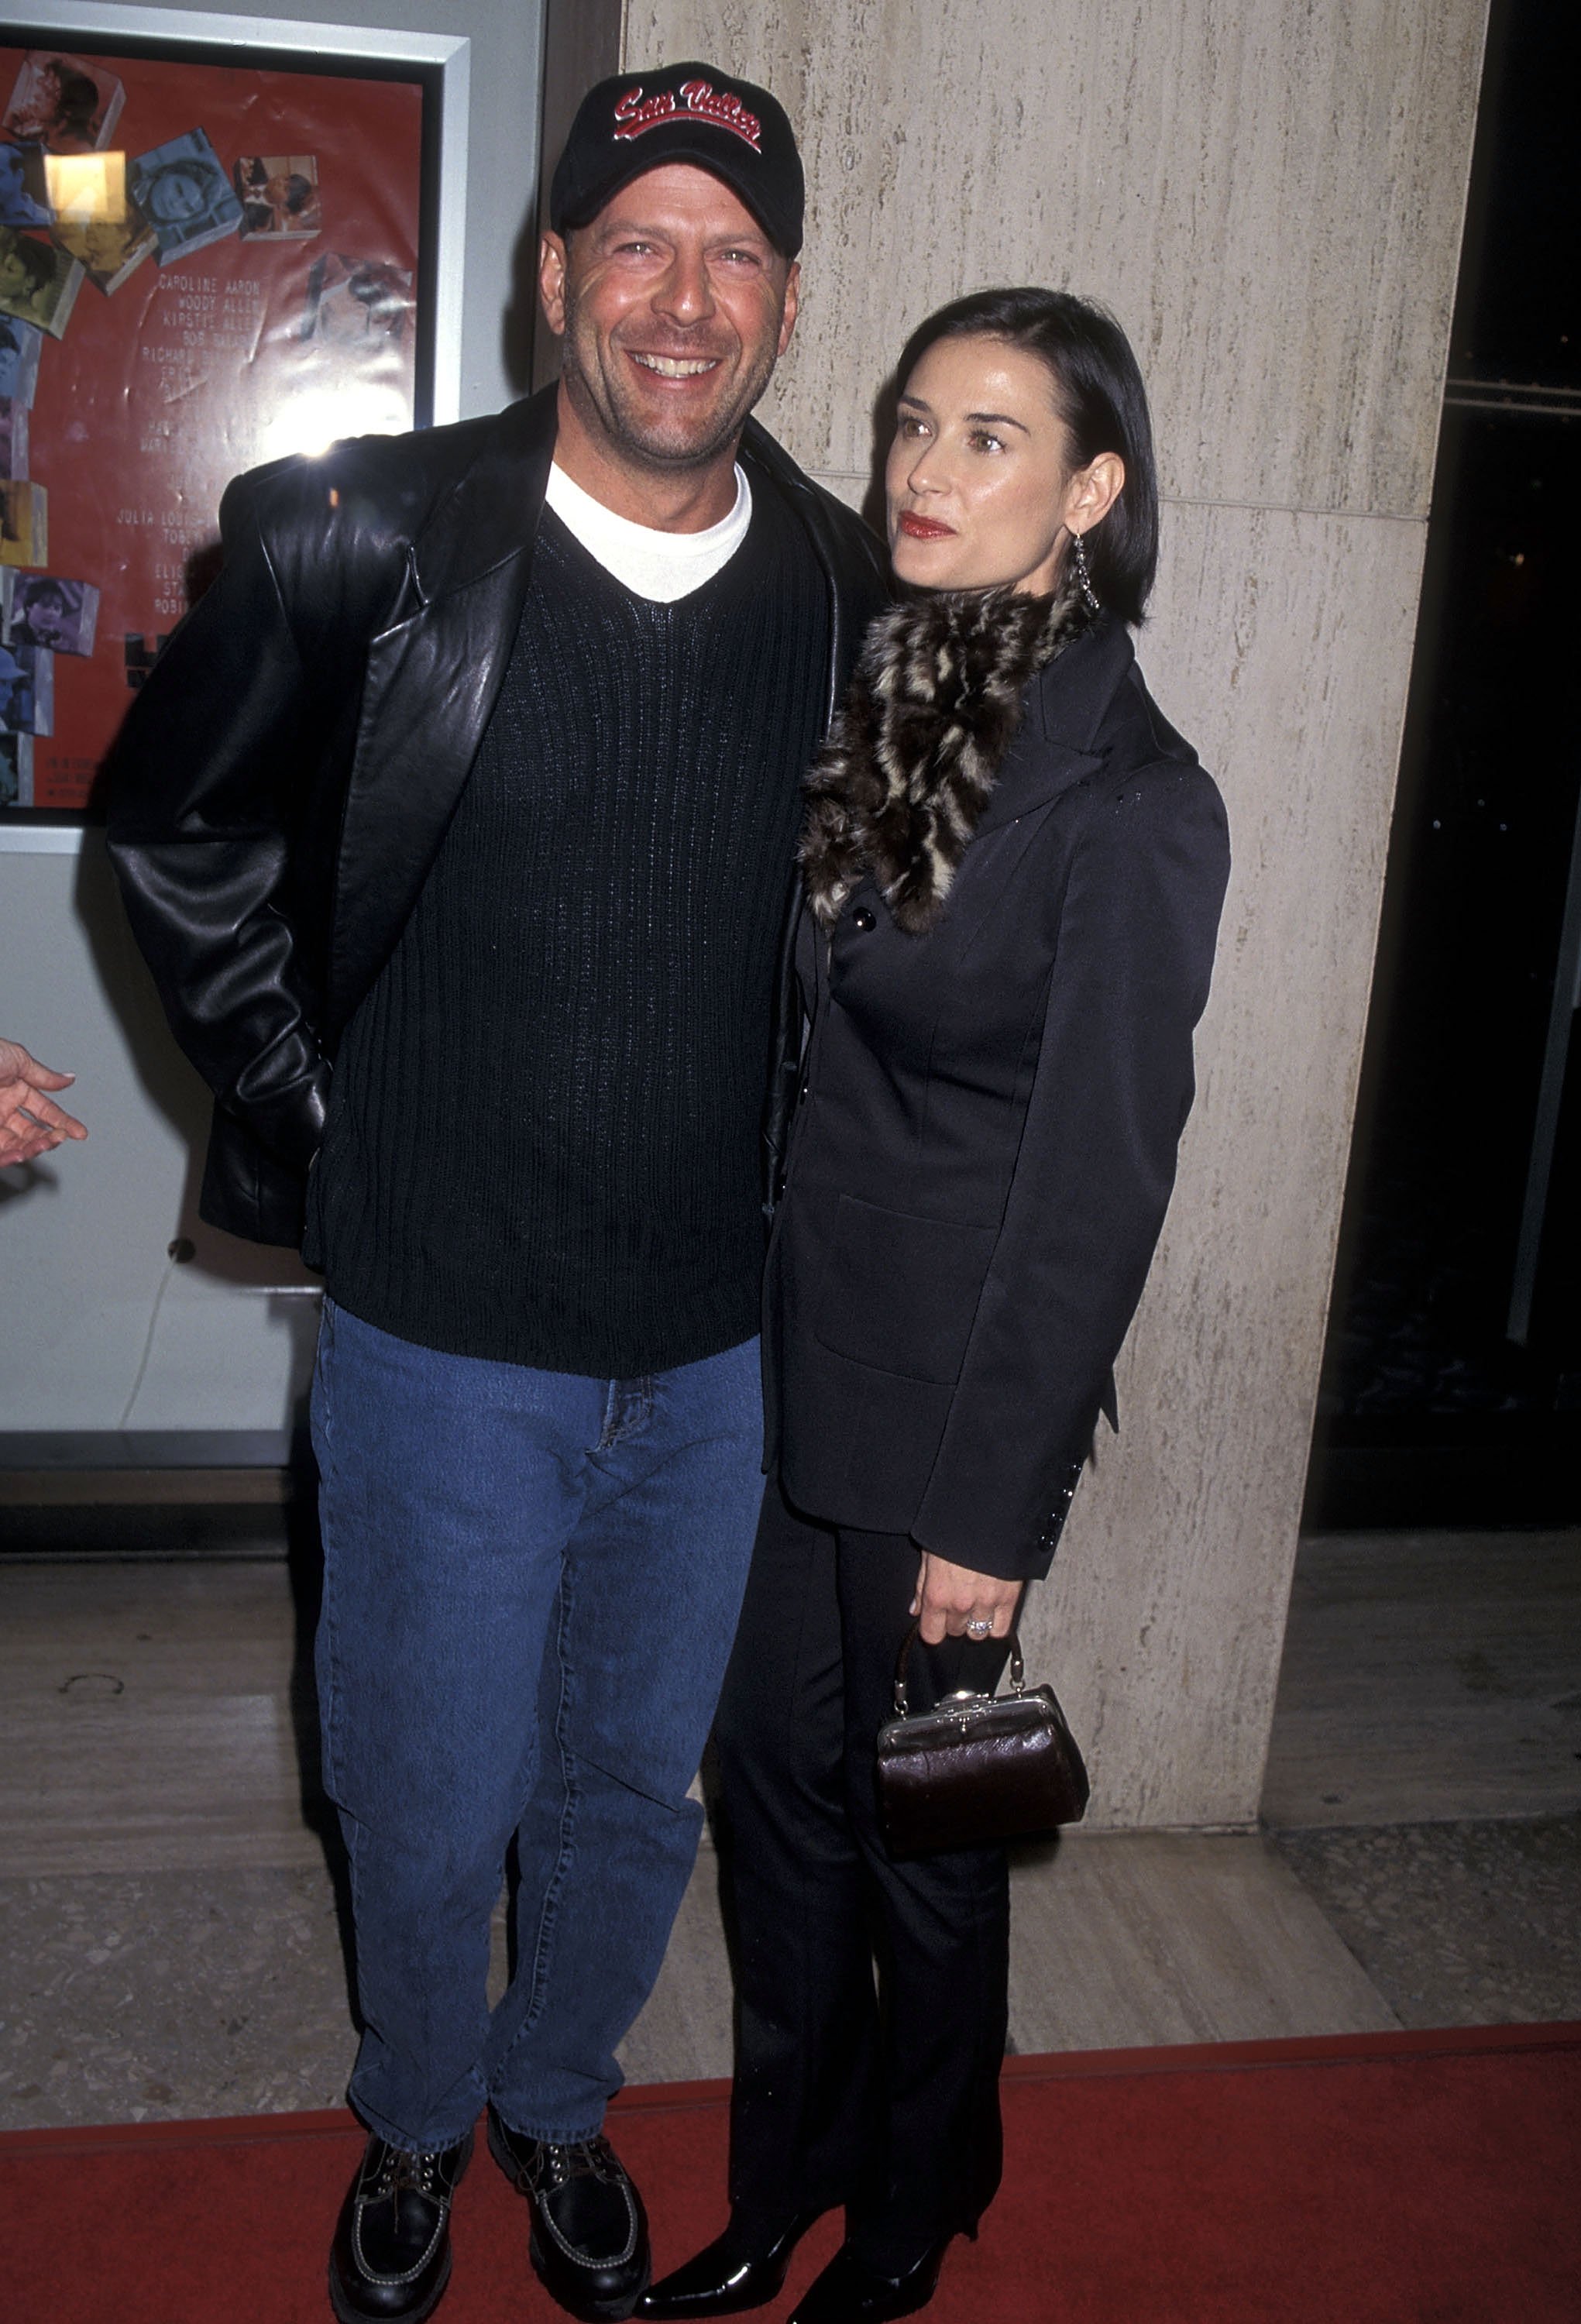 Bruce Willis and Demi Moore at the "Deconstructing Harry" Century City premiere on December 5, 1997, in California. | Source: Getty Images